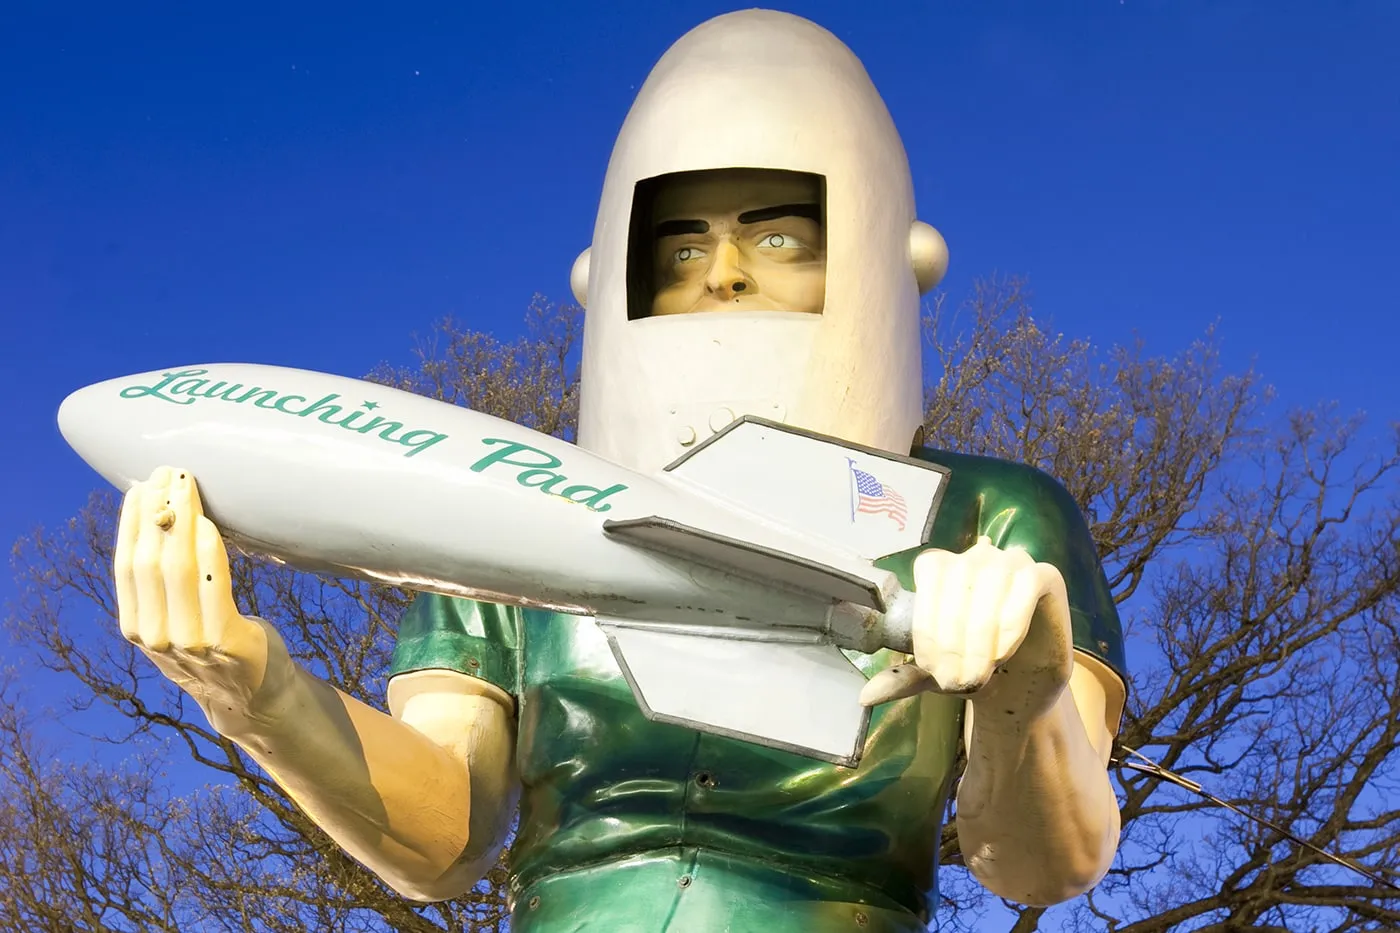 Best Illinois roadside attractions: Gemini Giant muffler man at the Launching Pad in Wilmington, Illinois. Visit this roadside attraction on an Illinois road trip with kids or weekend getaway with friends. Add the Gemini Giant to your road trip bucket list and visit them on your next travel adventure.